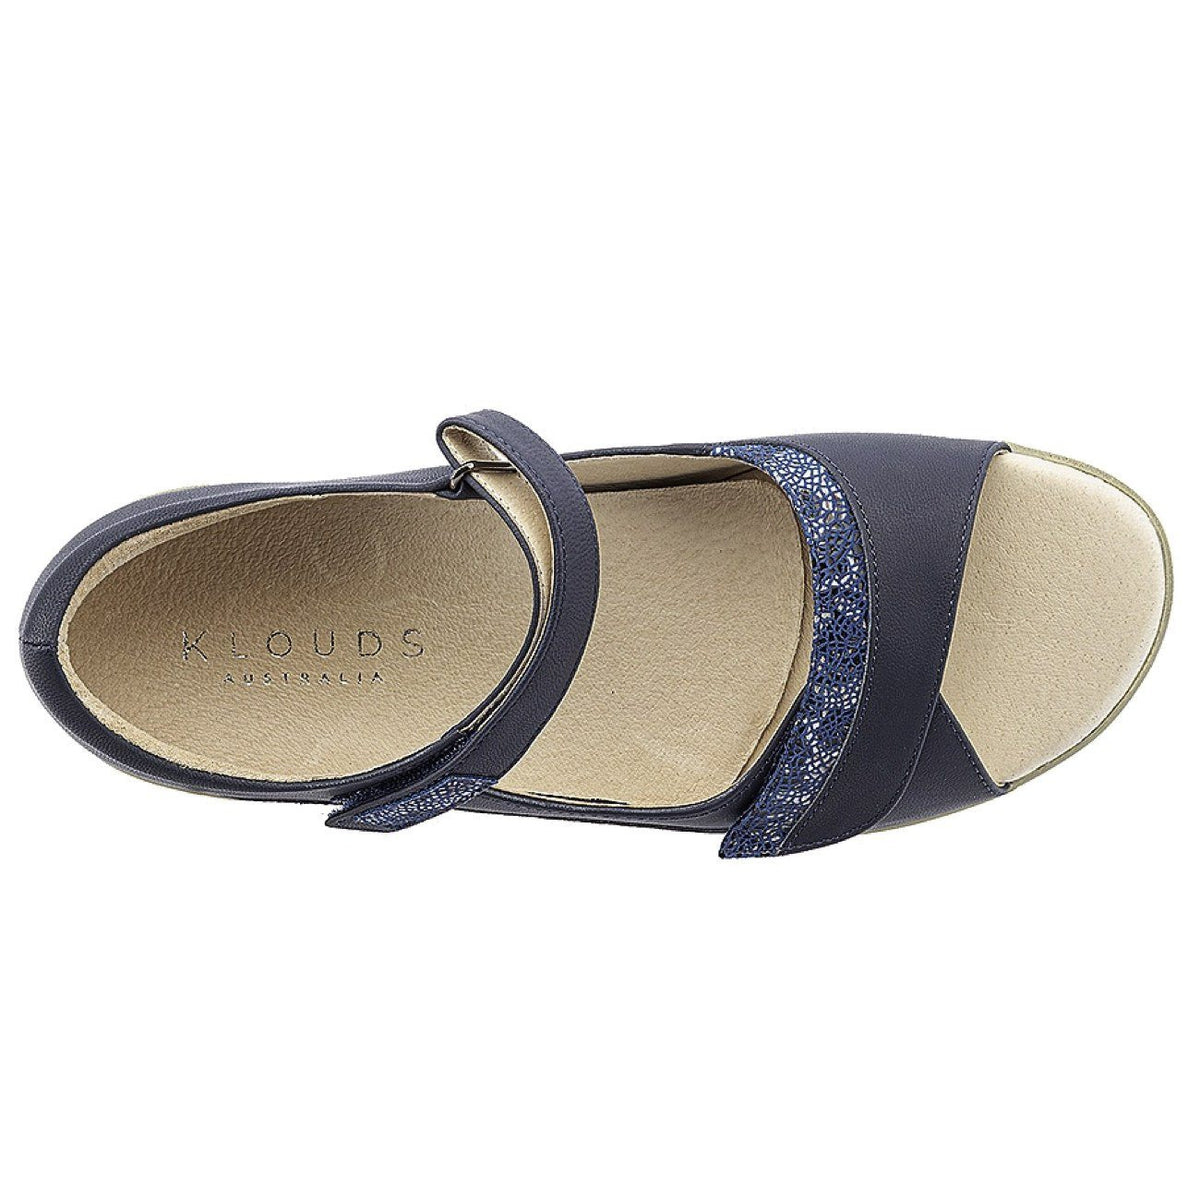 Klouds, Tracy, Sandal, Leather, Navy Combo Sandals Klouds 